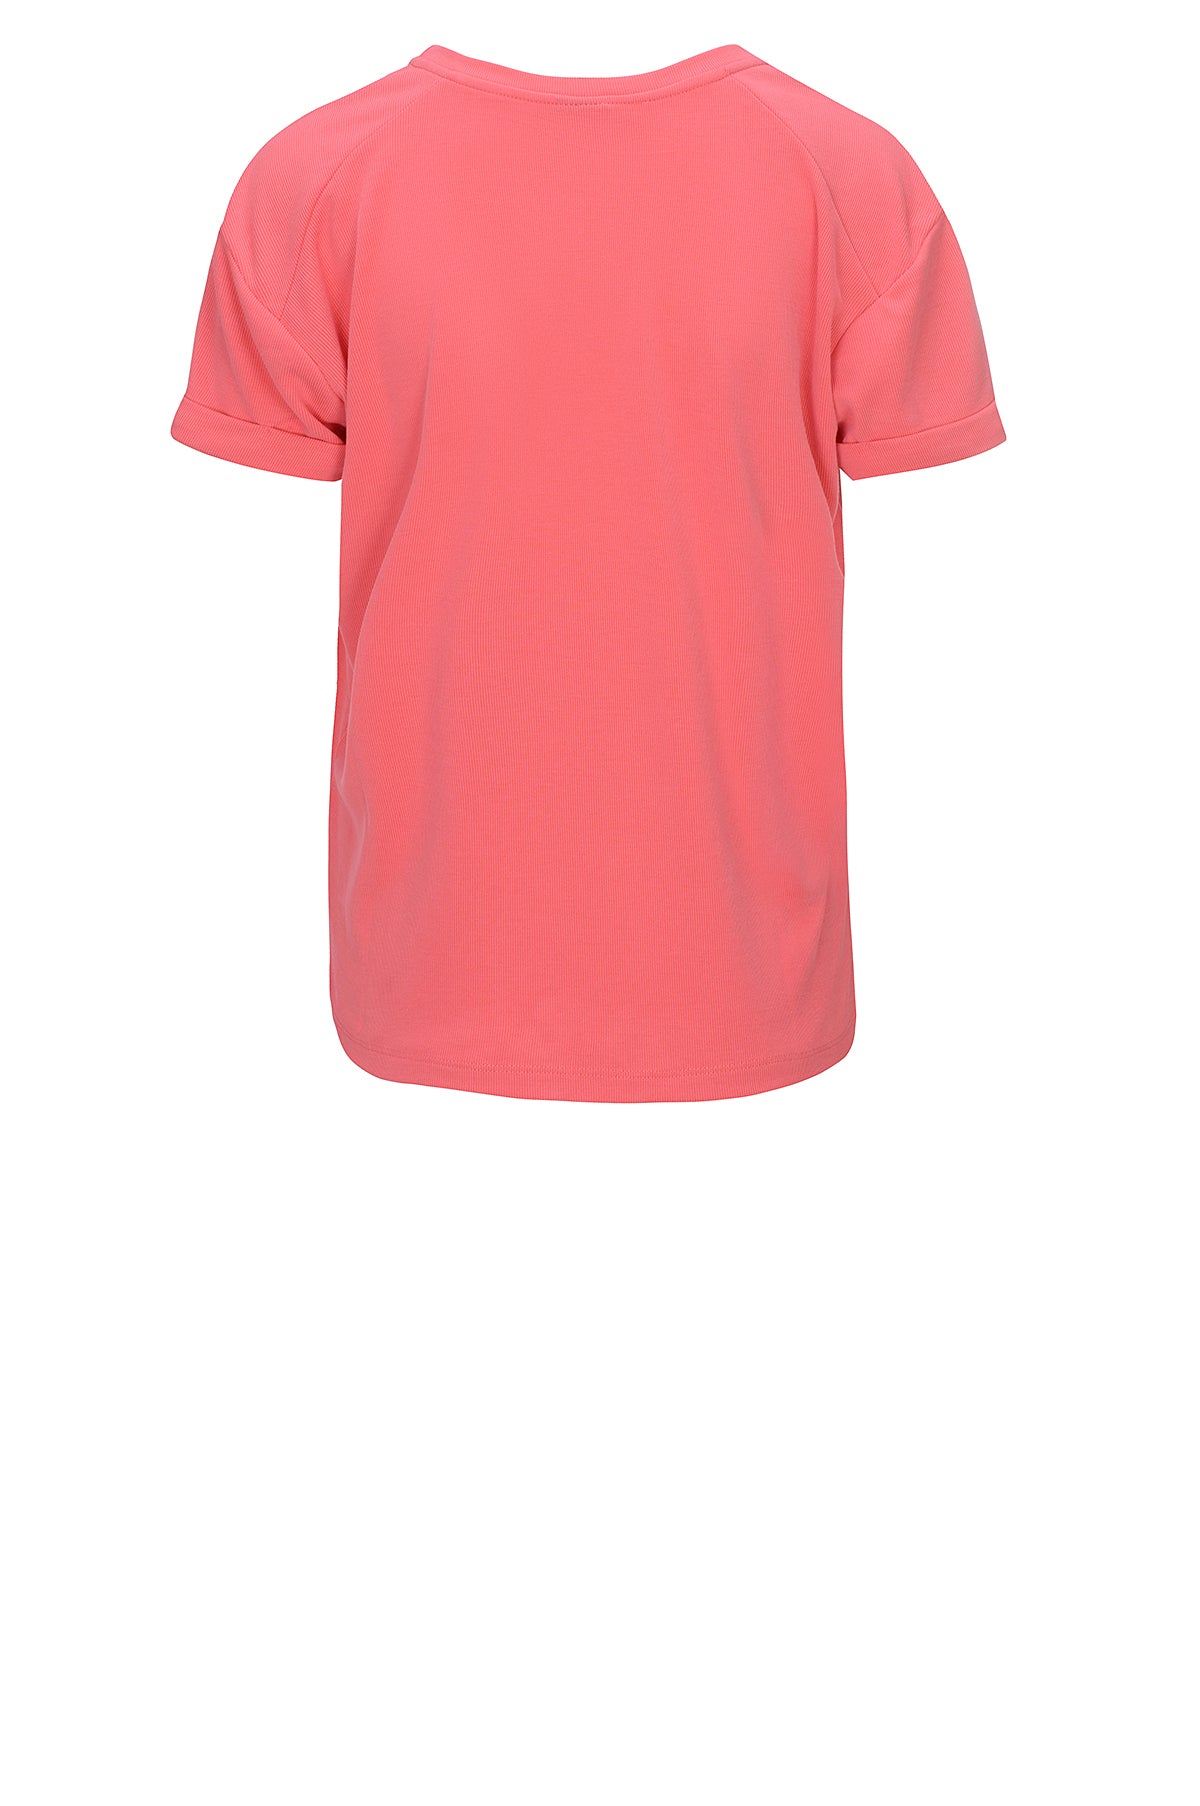 LUXZUZ // ONE TWO Karin T-Shirt 342 Soft Coral